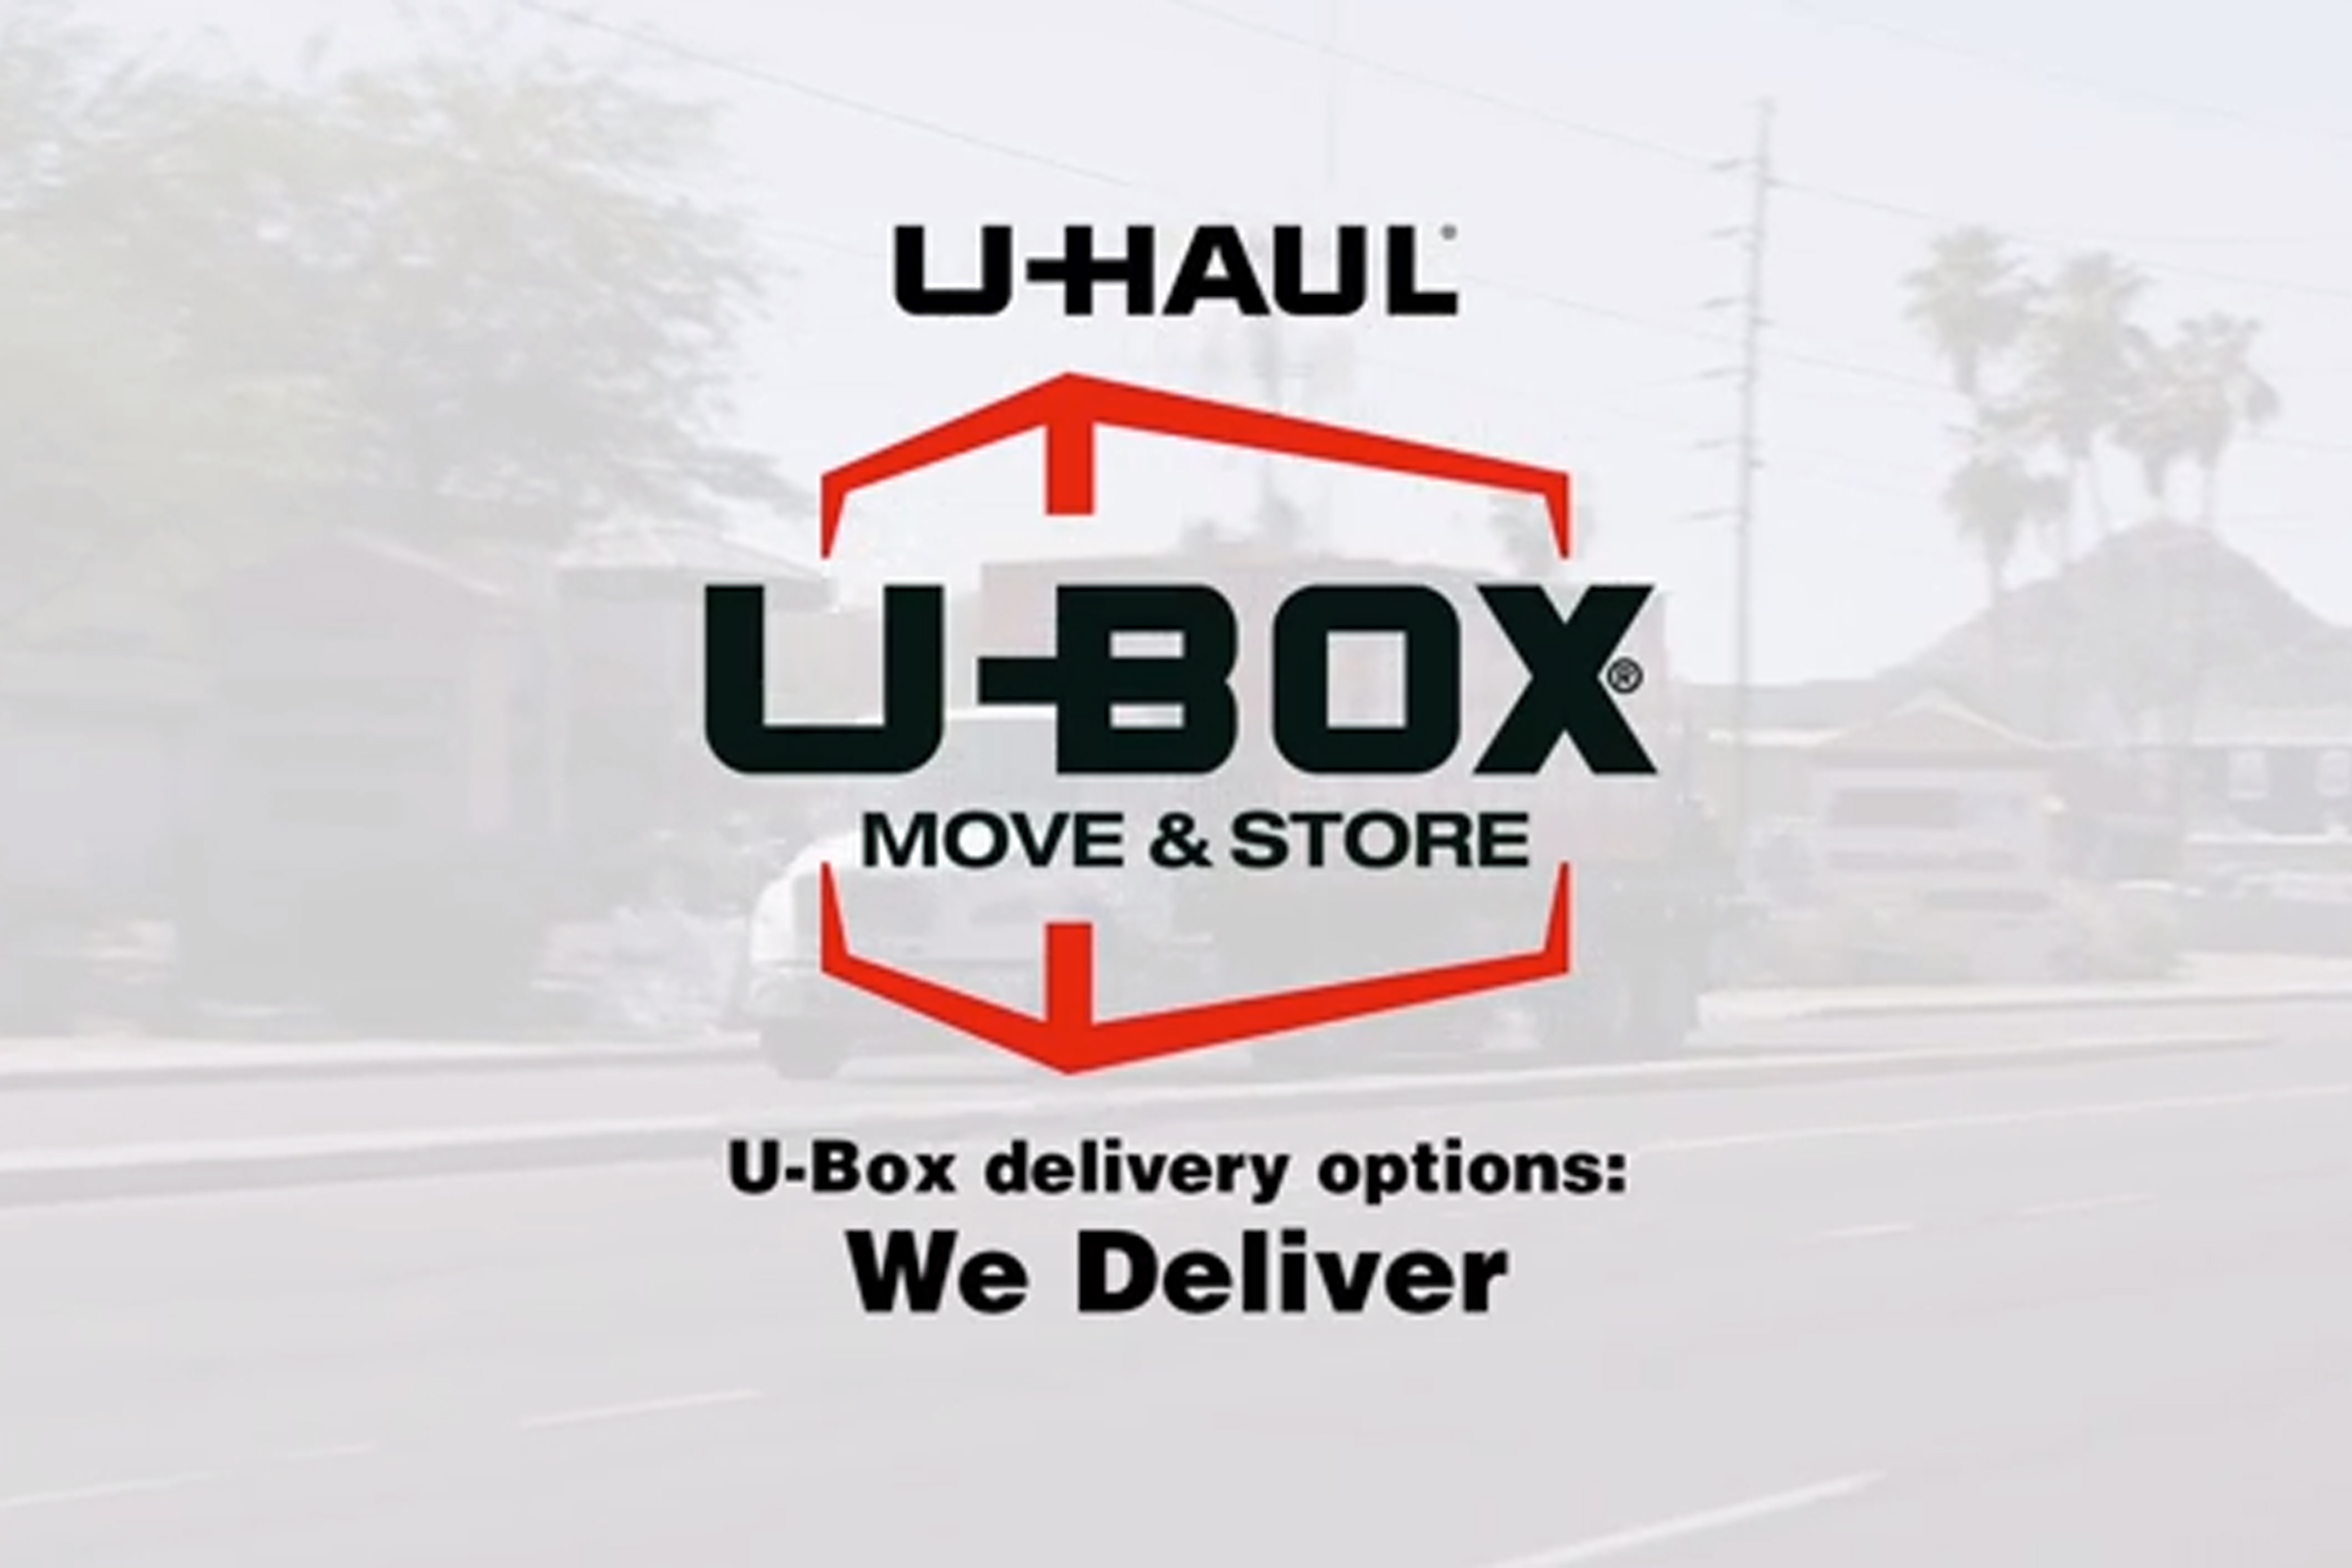 Need an easier way to move or store items without the driving, interaction and time constraints? Try U-Box home delivery and pick up.